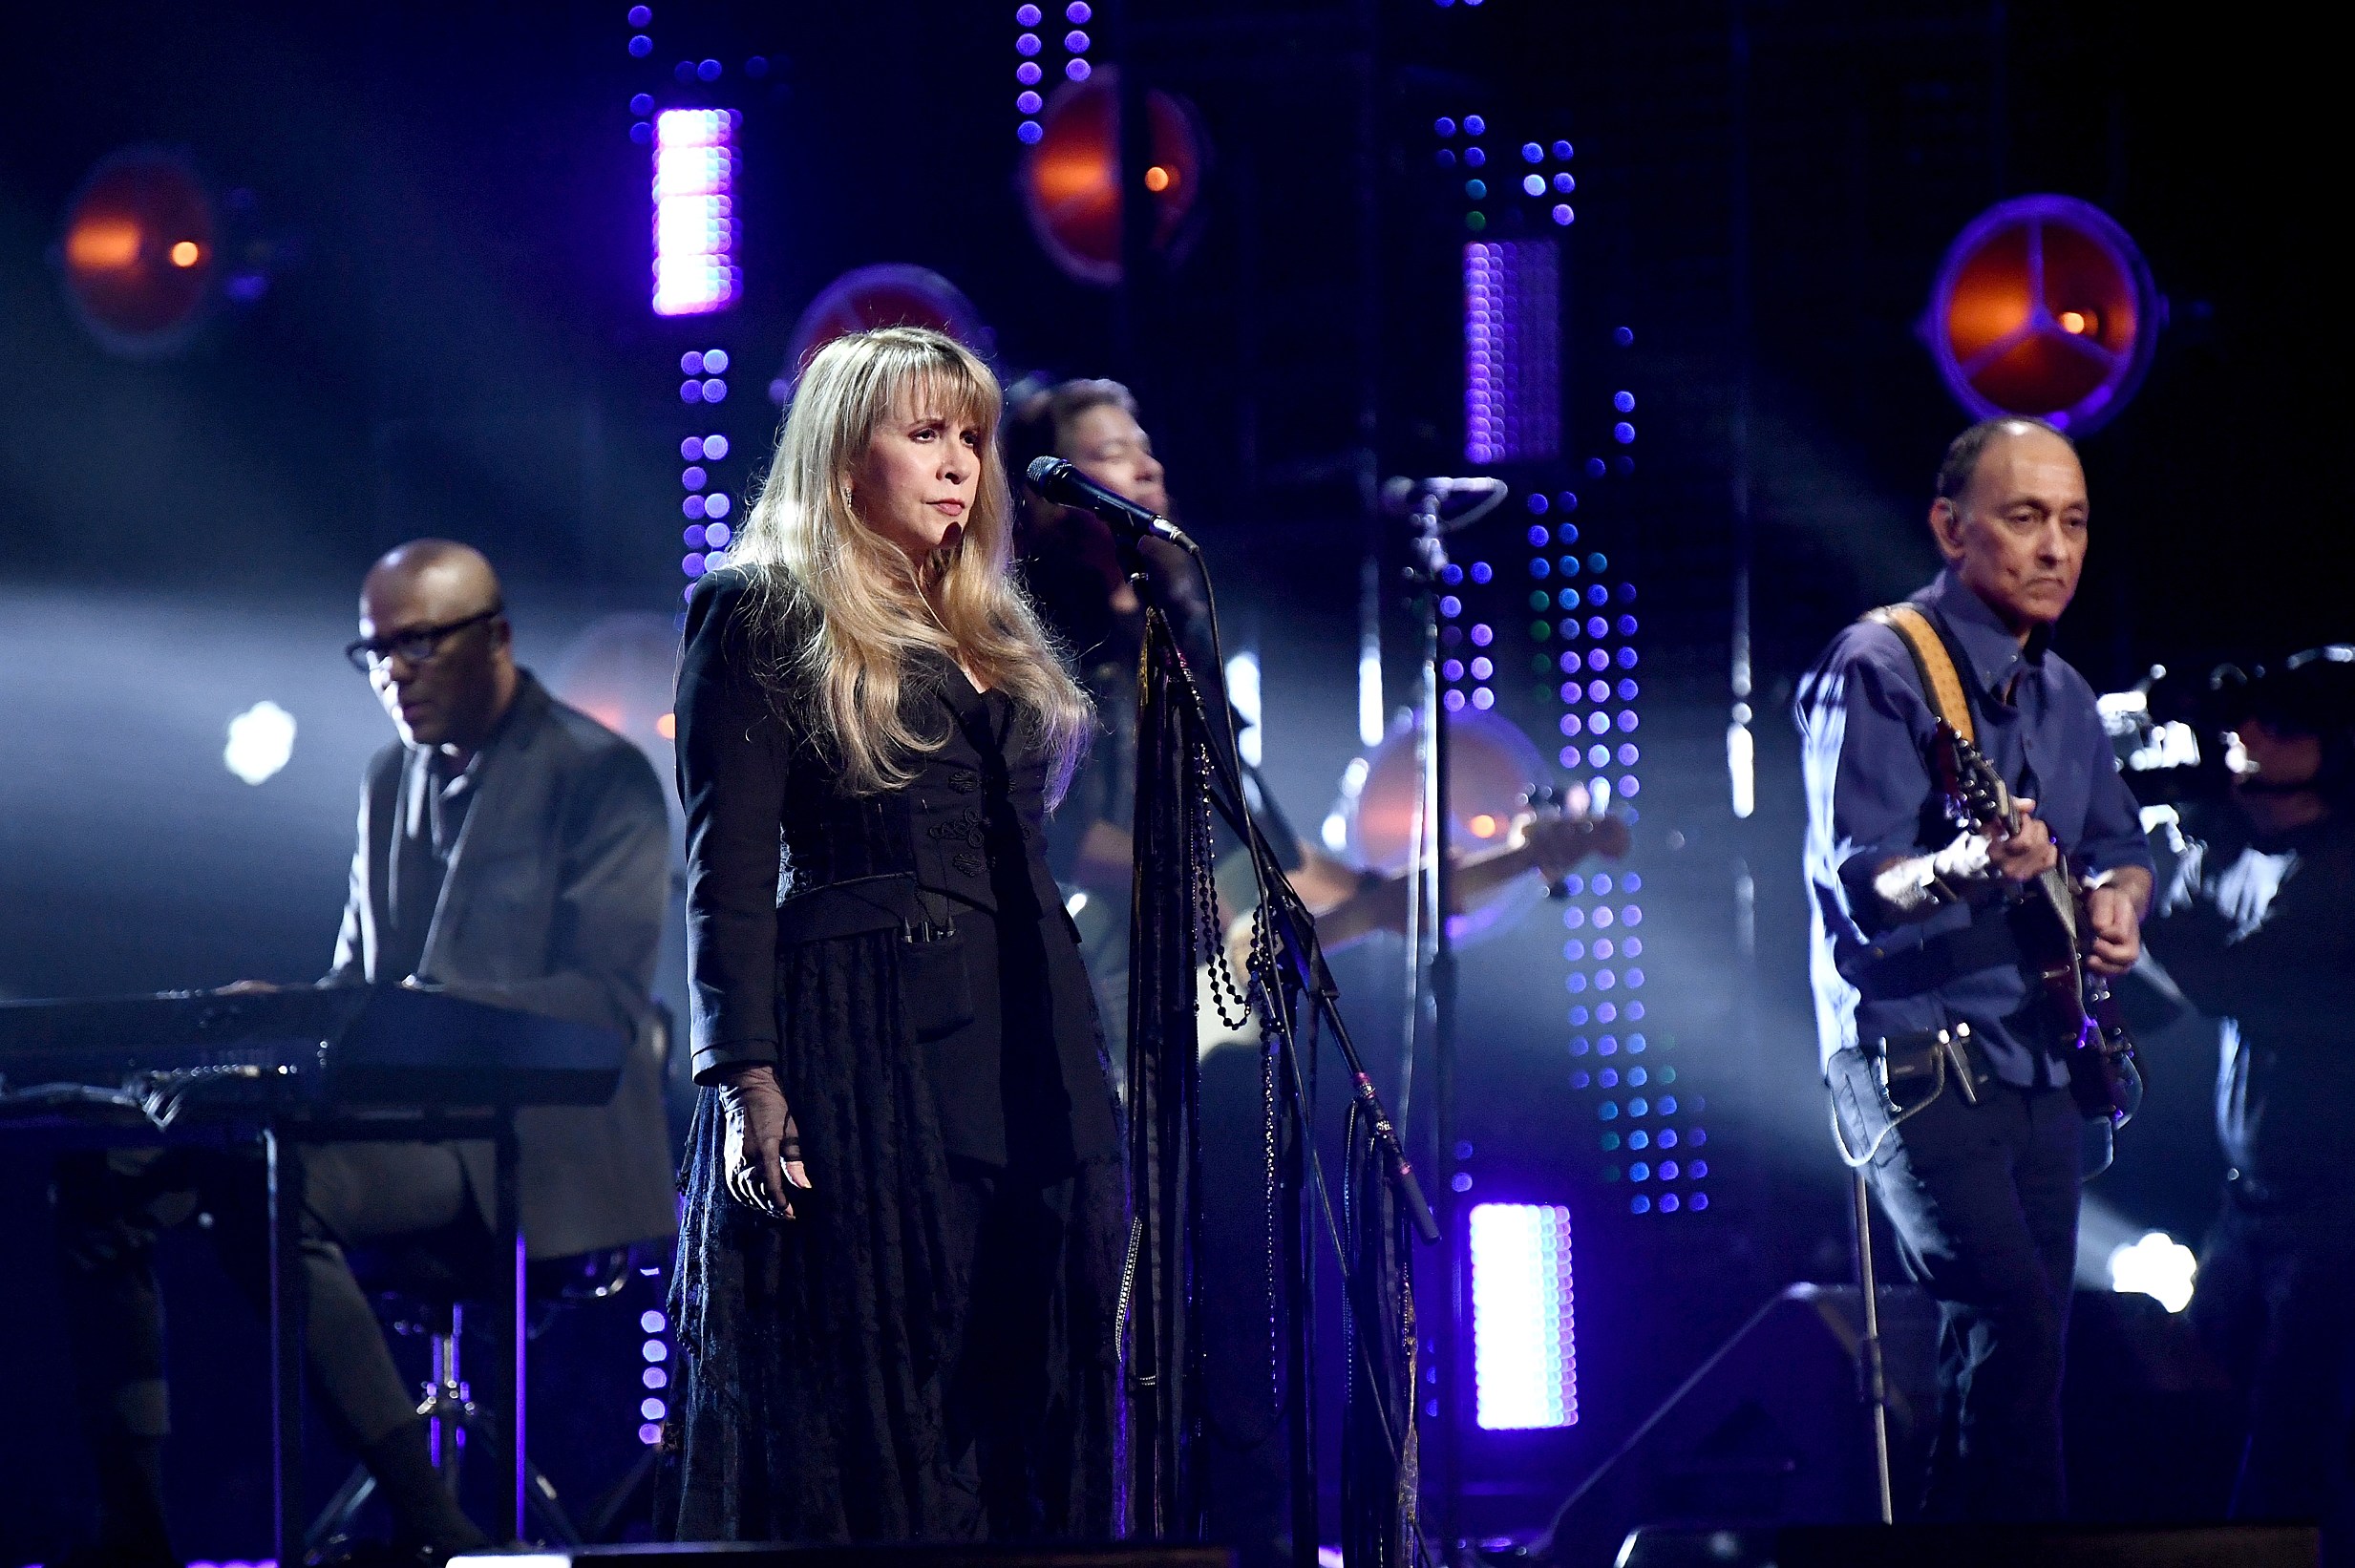 Inductee Stevie Nicks performs at the 2019 Rock & Roll Hall Of Fame Induction Ceremony - Show at Barclays Center on March 29, 2019 in New York City. (Photo by Dimitrios Kambouris/Getty Images For The Rock and Roll Hall of Fame)